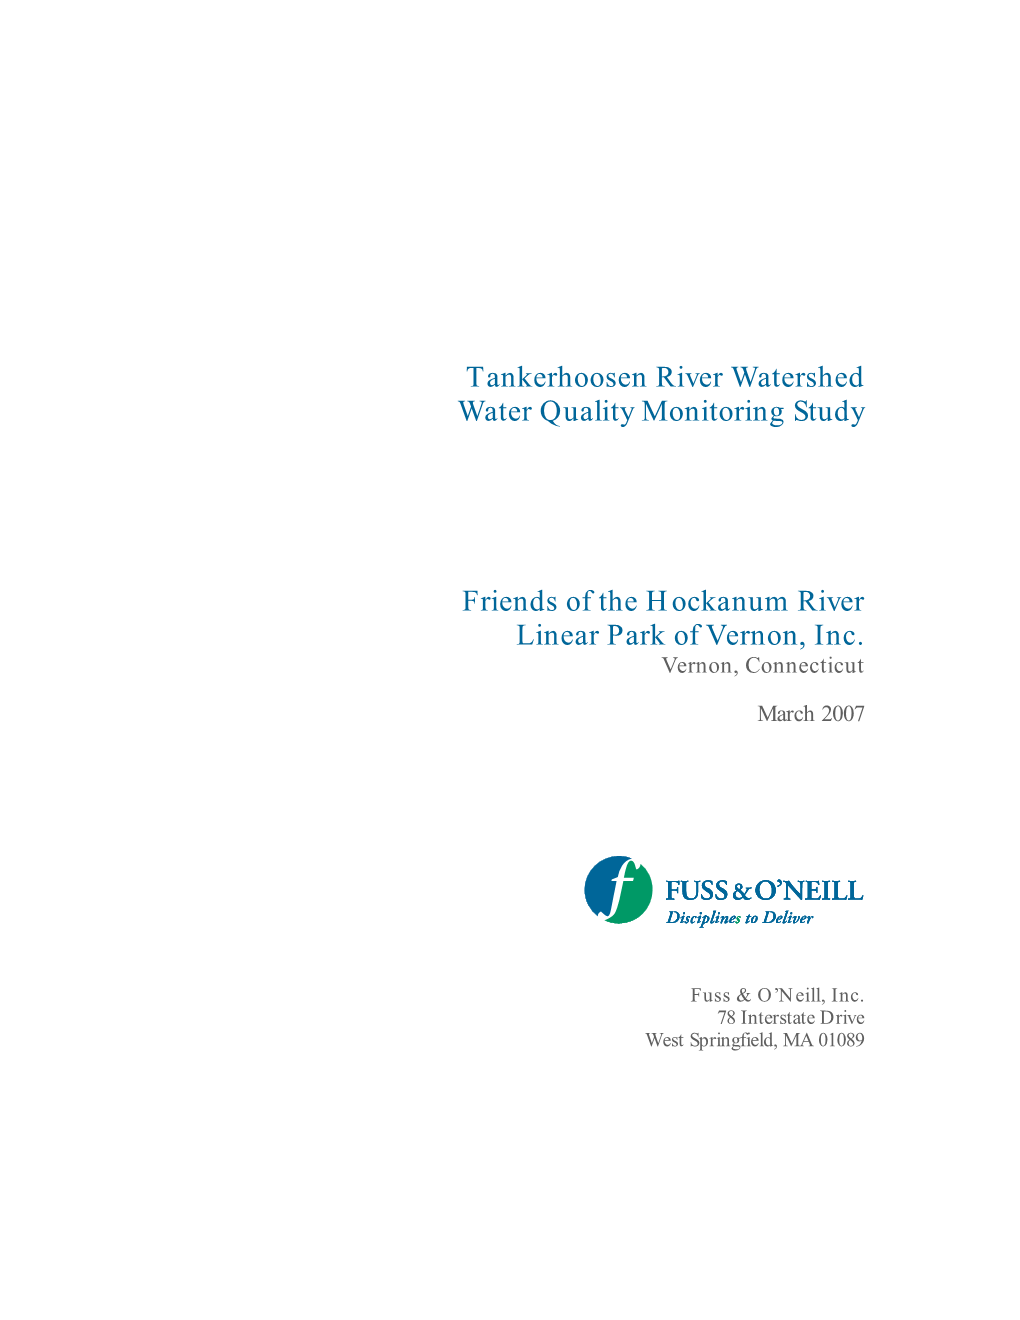 TANKERHOOSEN RIVER WATERSHED WATER QUALITY MONITORING STUDY Friends of the Hockanum River Linear Park of Vernon, Inc